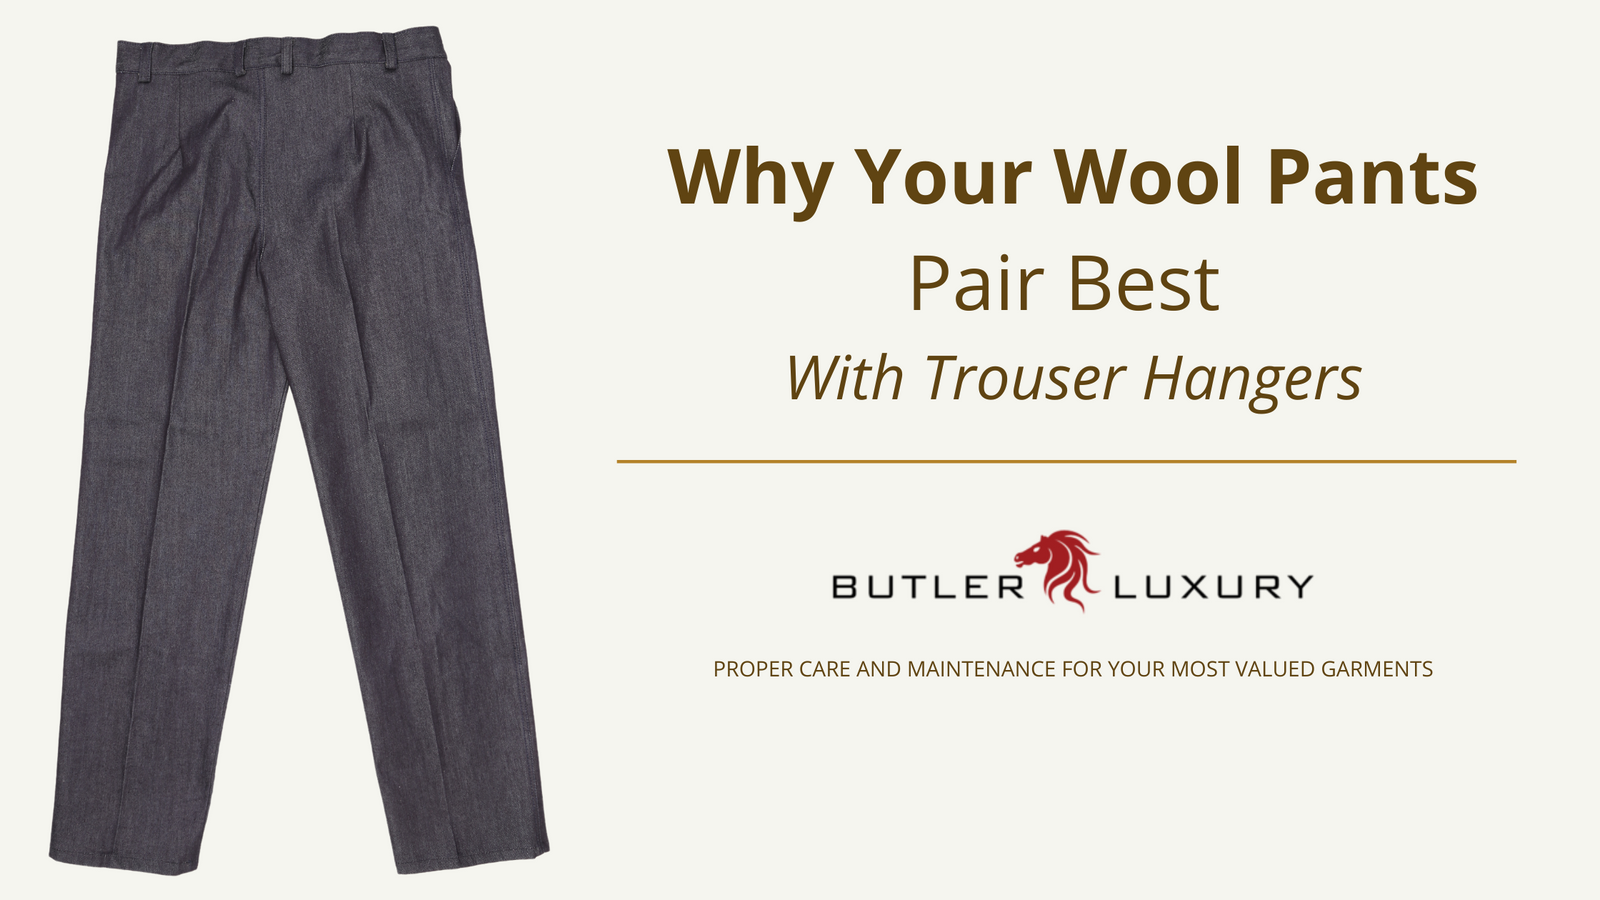 Why Your Wool Pants Pair Best With Trouser Hangers - Butler Luxury